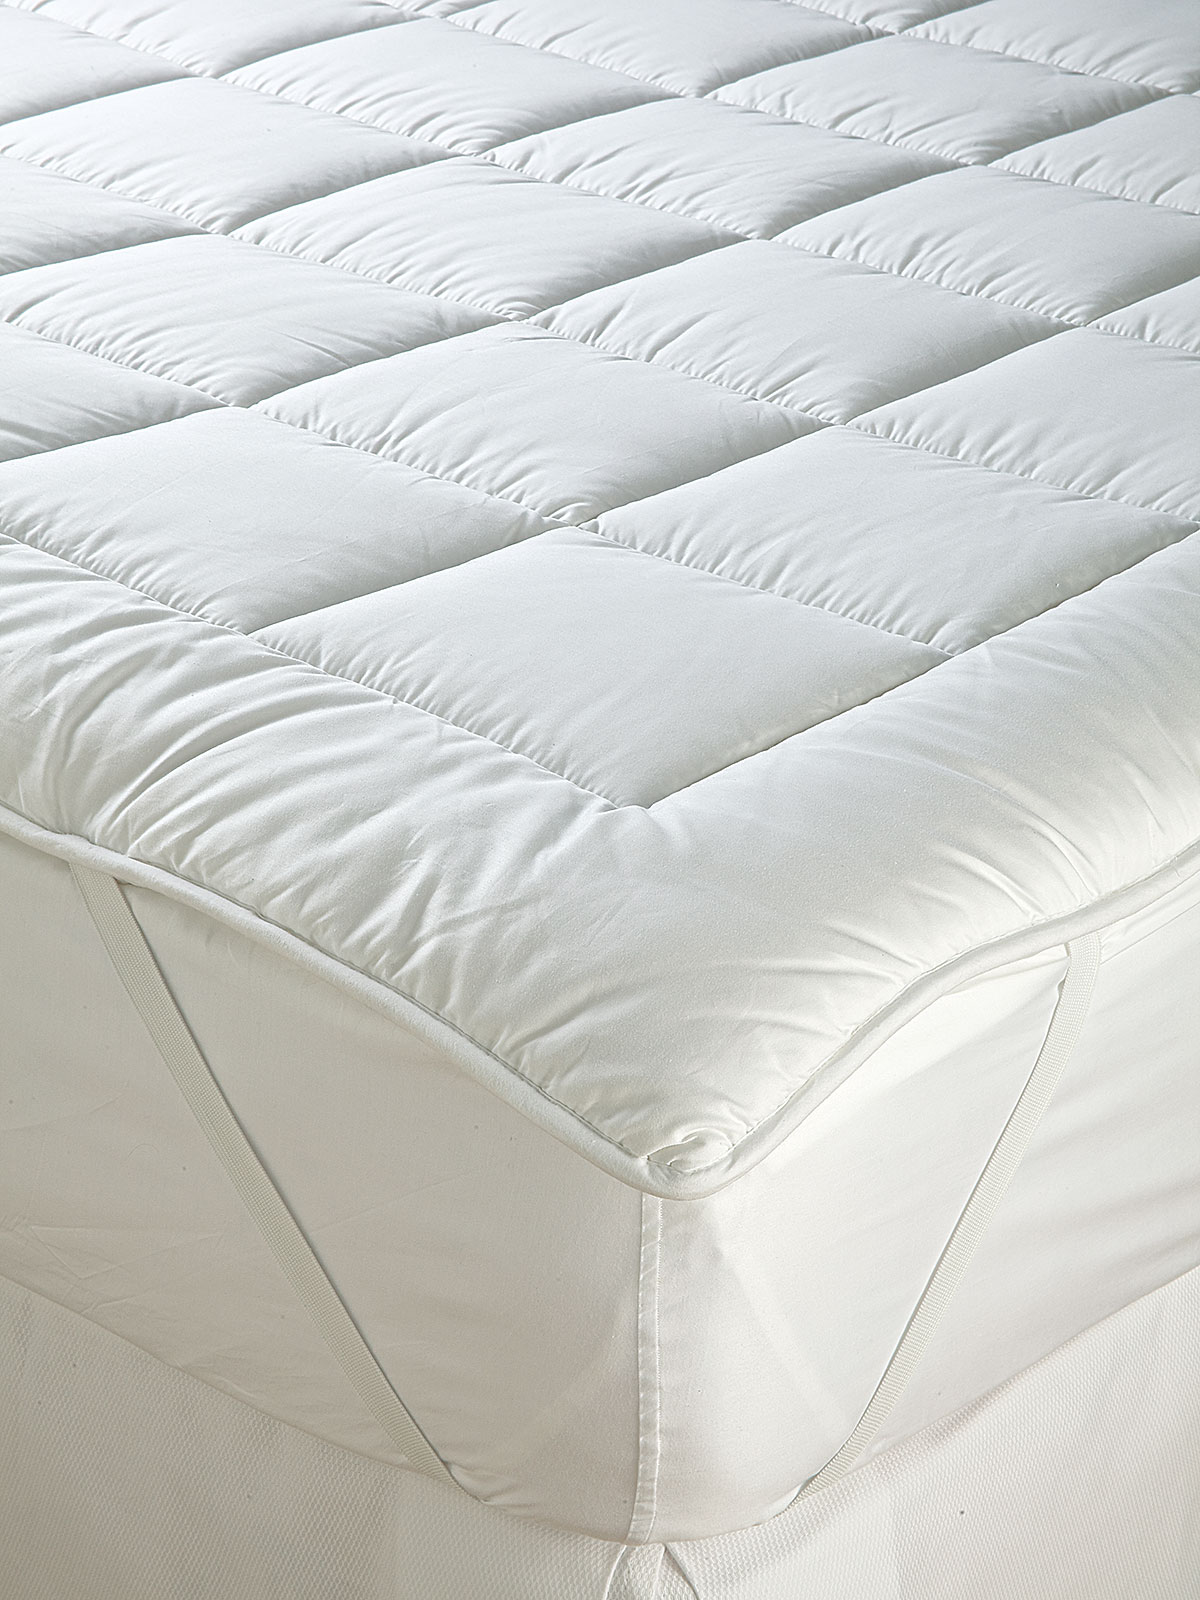 IMAGE OF WASHABLE WOOL FEATHERBED